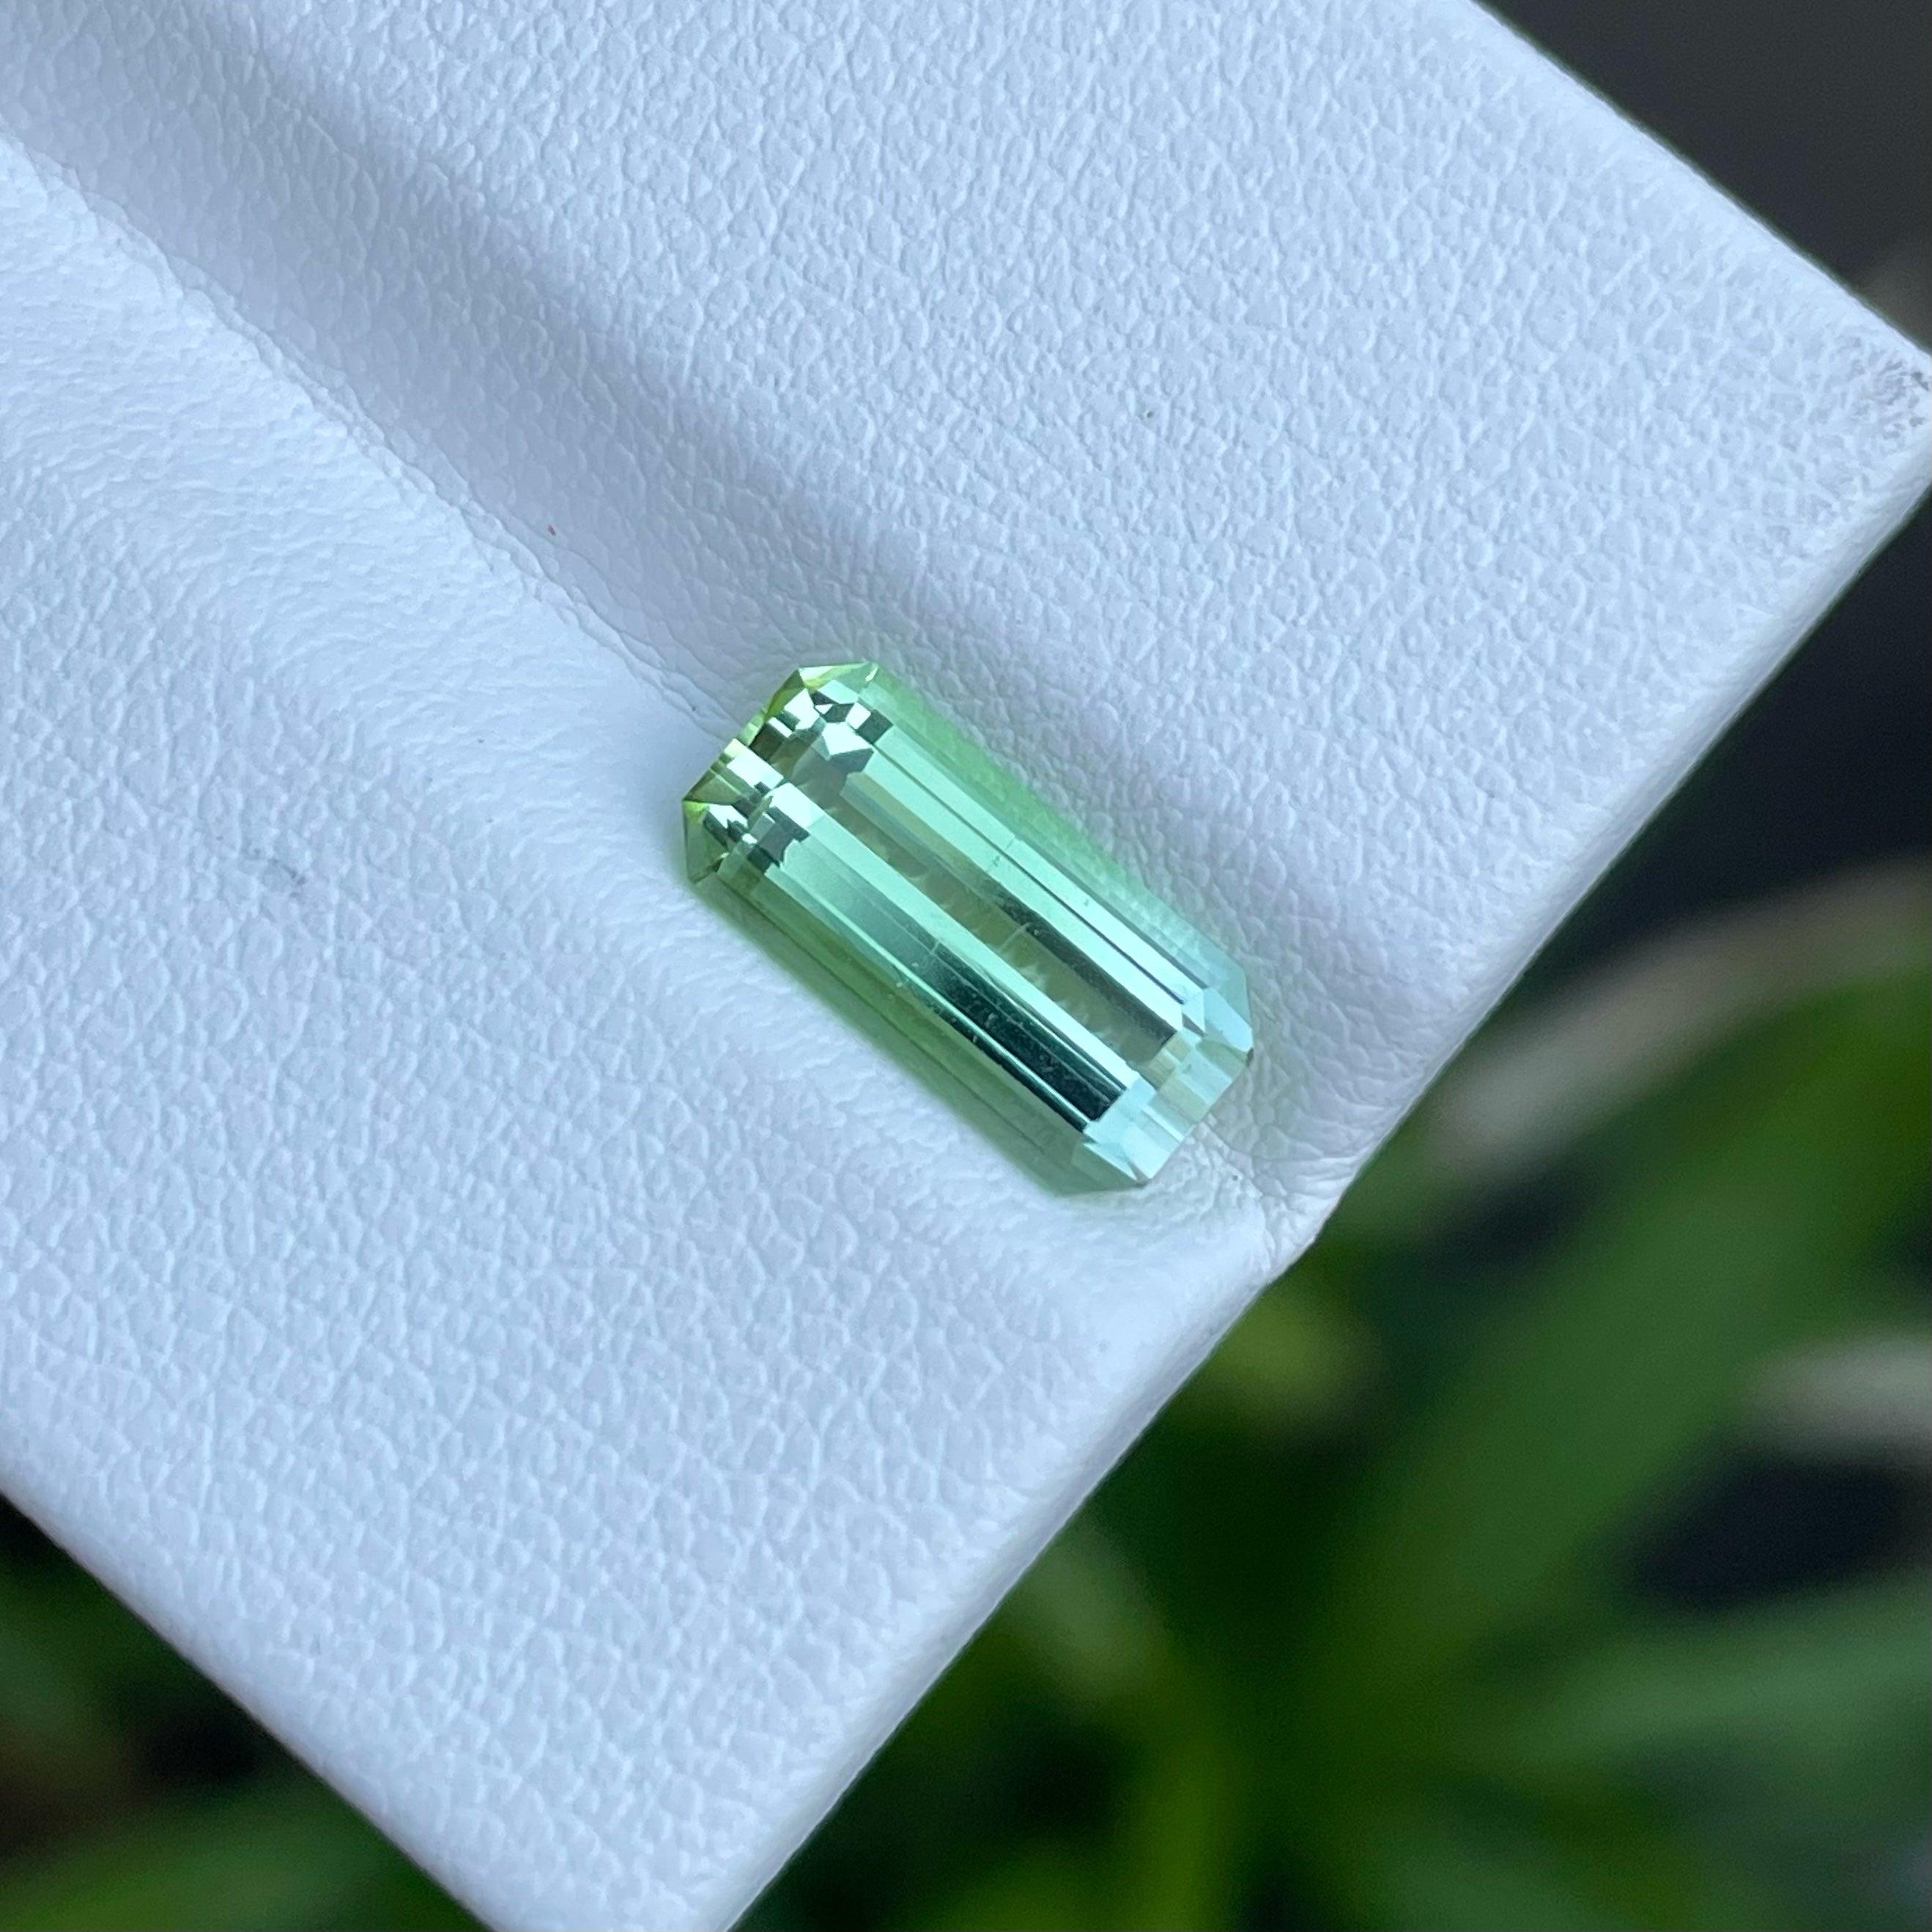 Brilliant Mint-Green Tourmaline Gemstone, Available For Sale At Wholesale Price Natural High Quality 2.75 Carats VVS Clarity Untreated Tourmaline From Afghanistan.

Product Information:
GEMSTONE TYPE:	Spectacular Mint Green Tourmaline
WEIGHT:	2.75